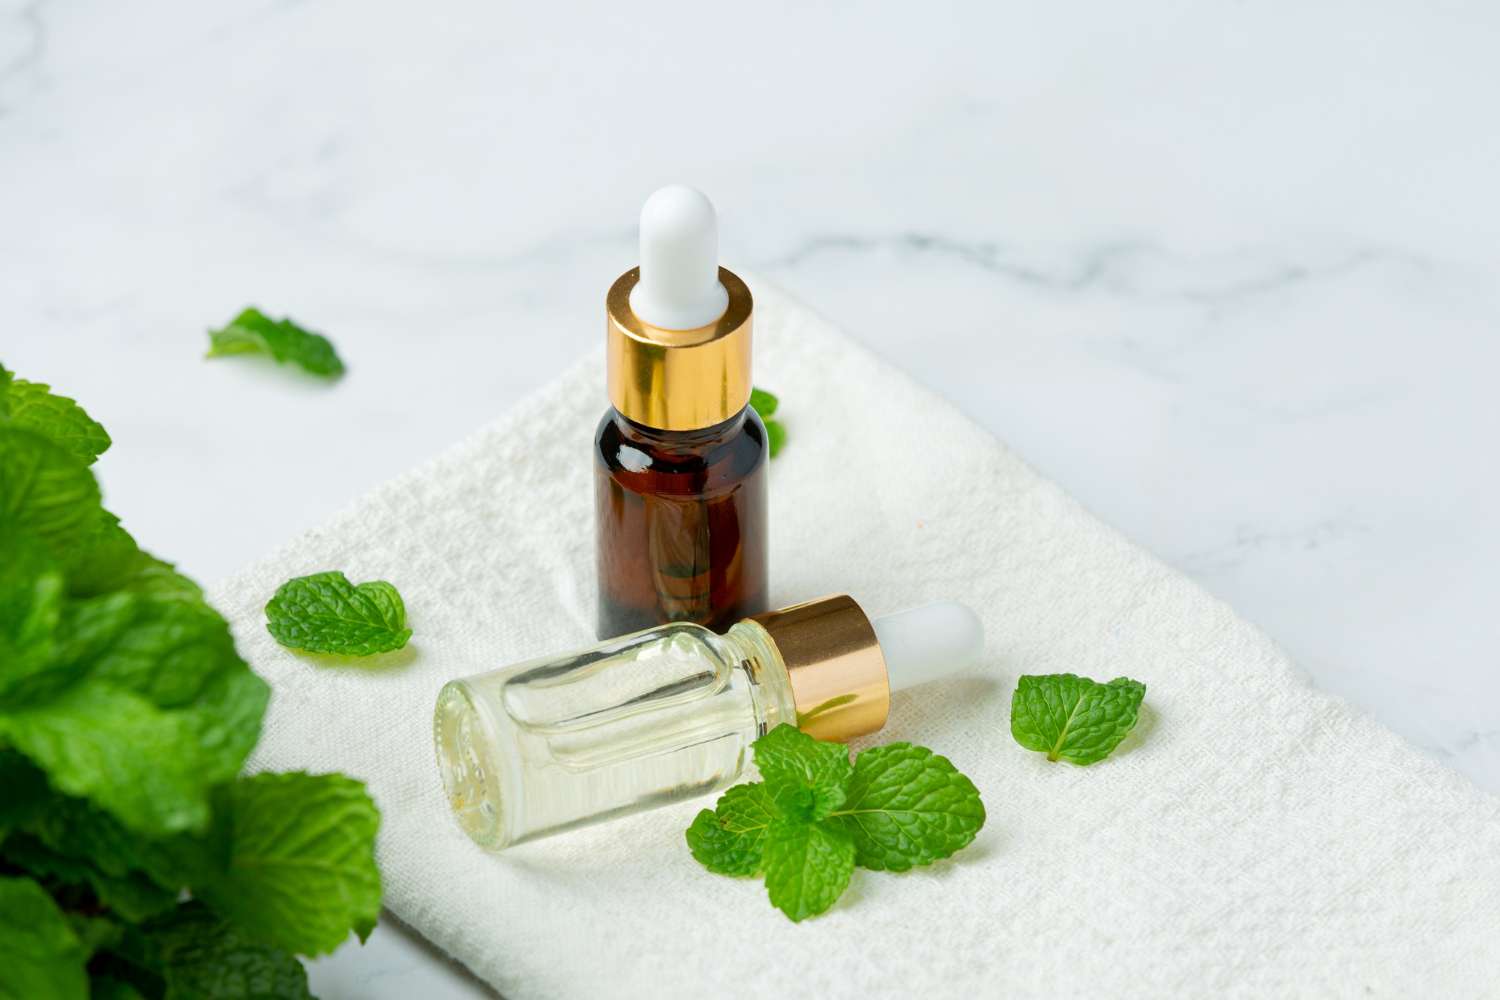 Are ‘natural’ essential oils safe to use?